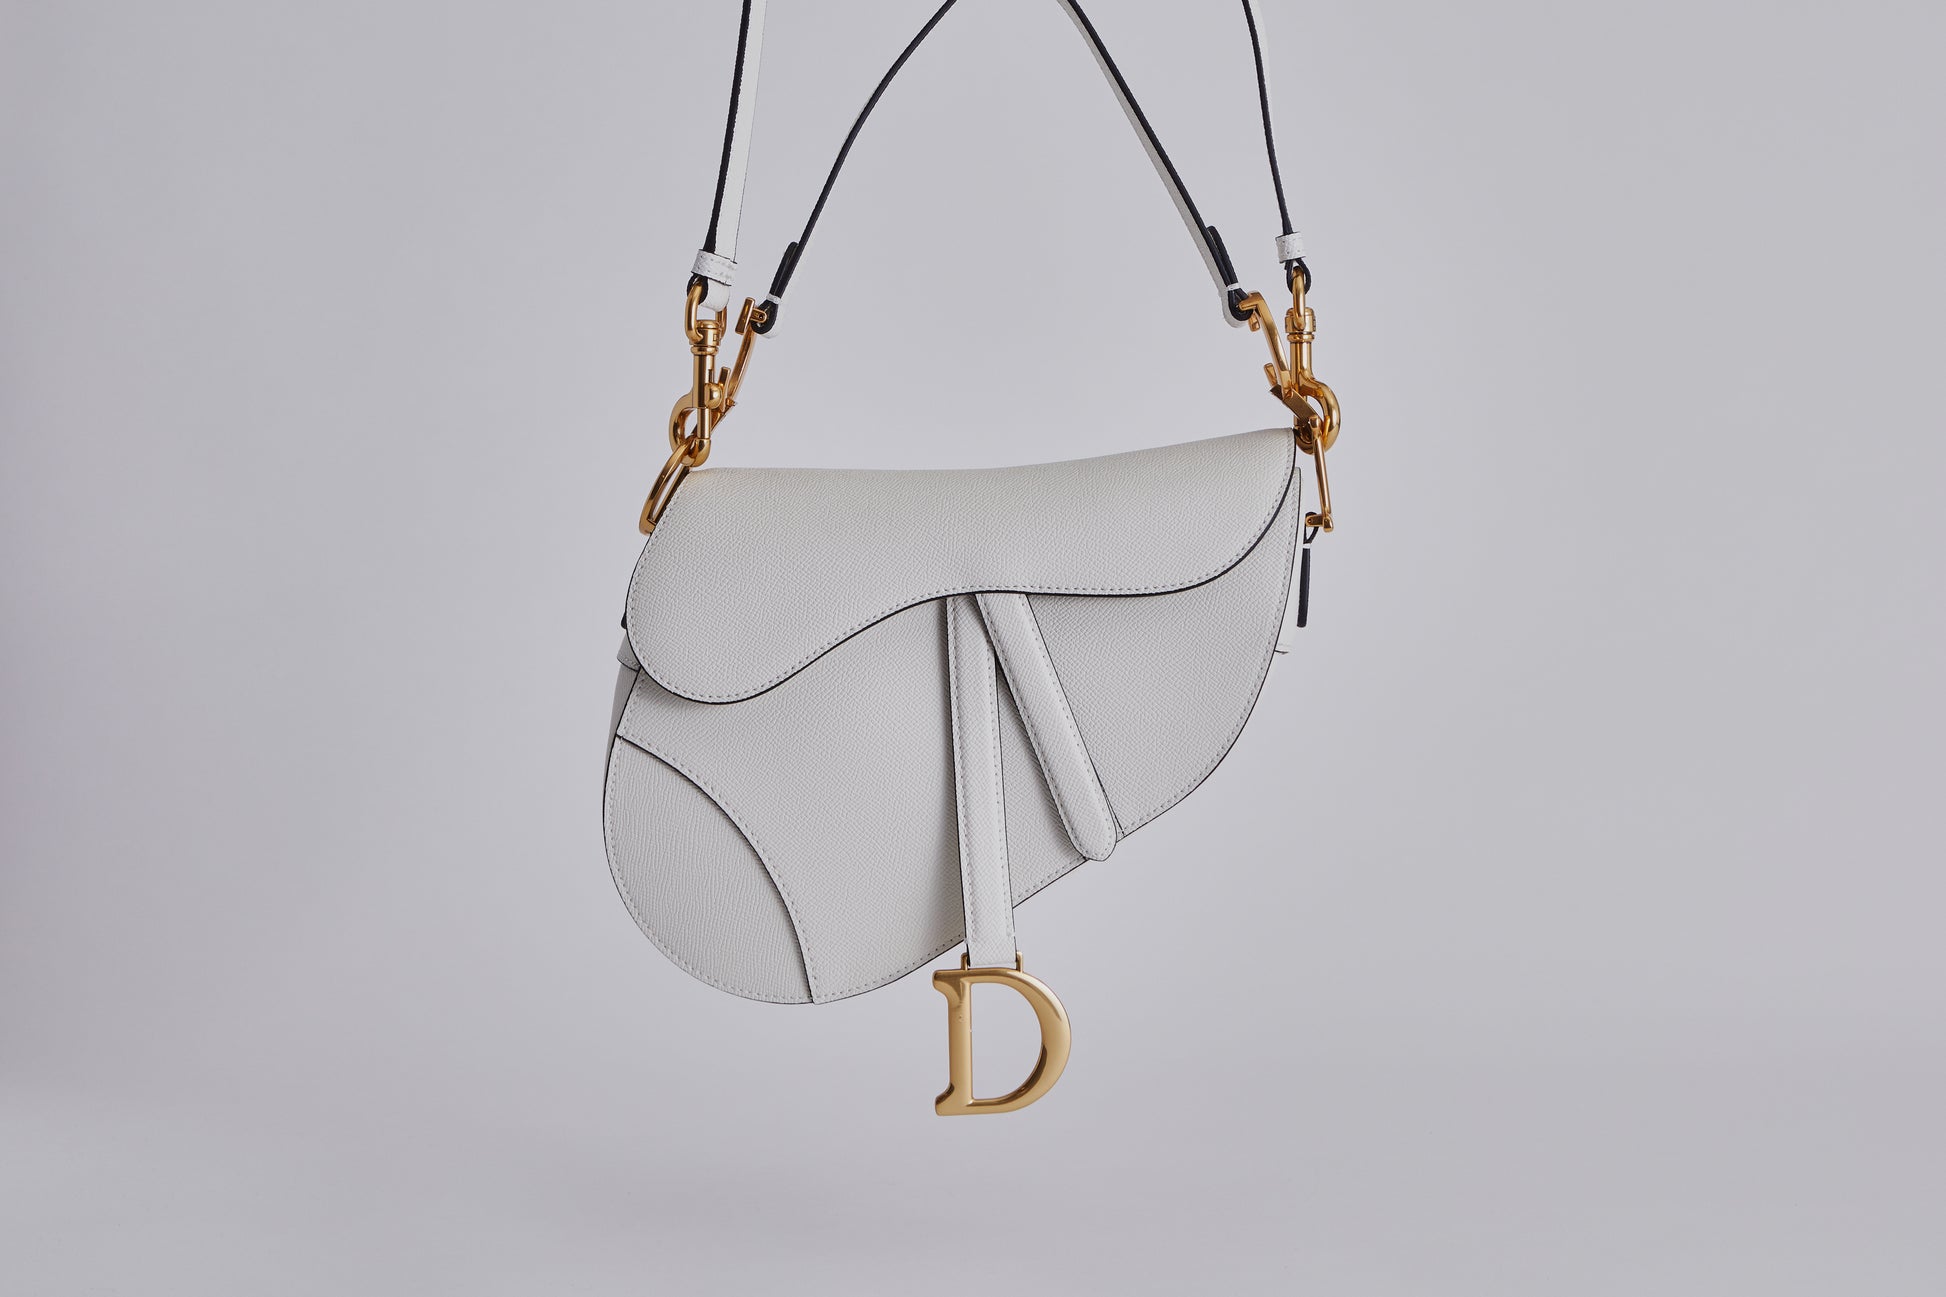 Dior Saddle bag with strap white leather